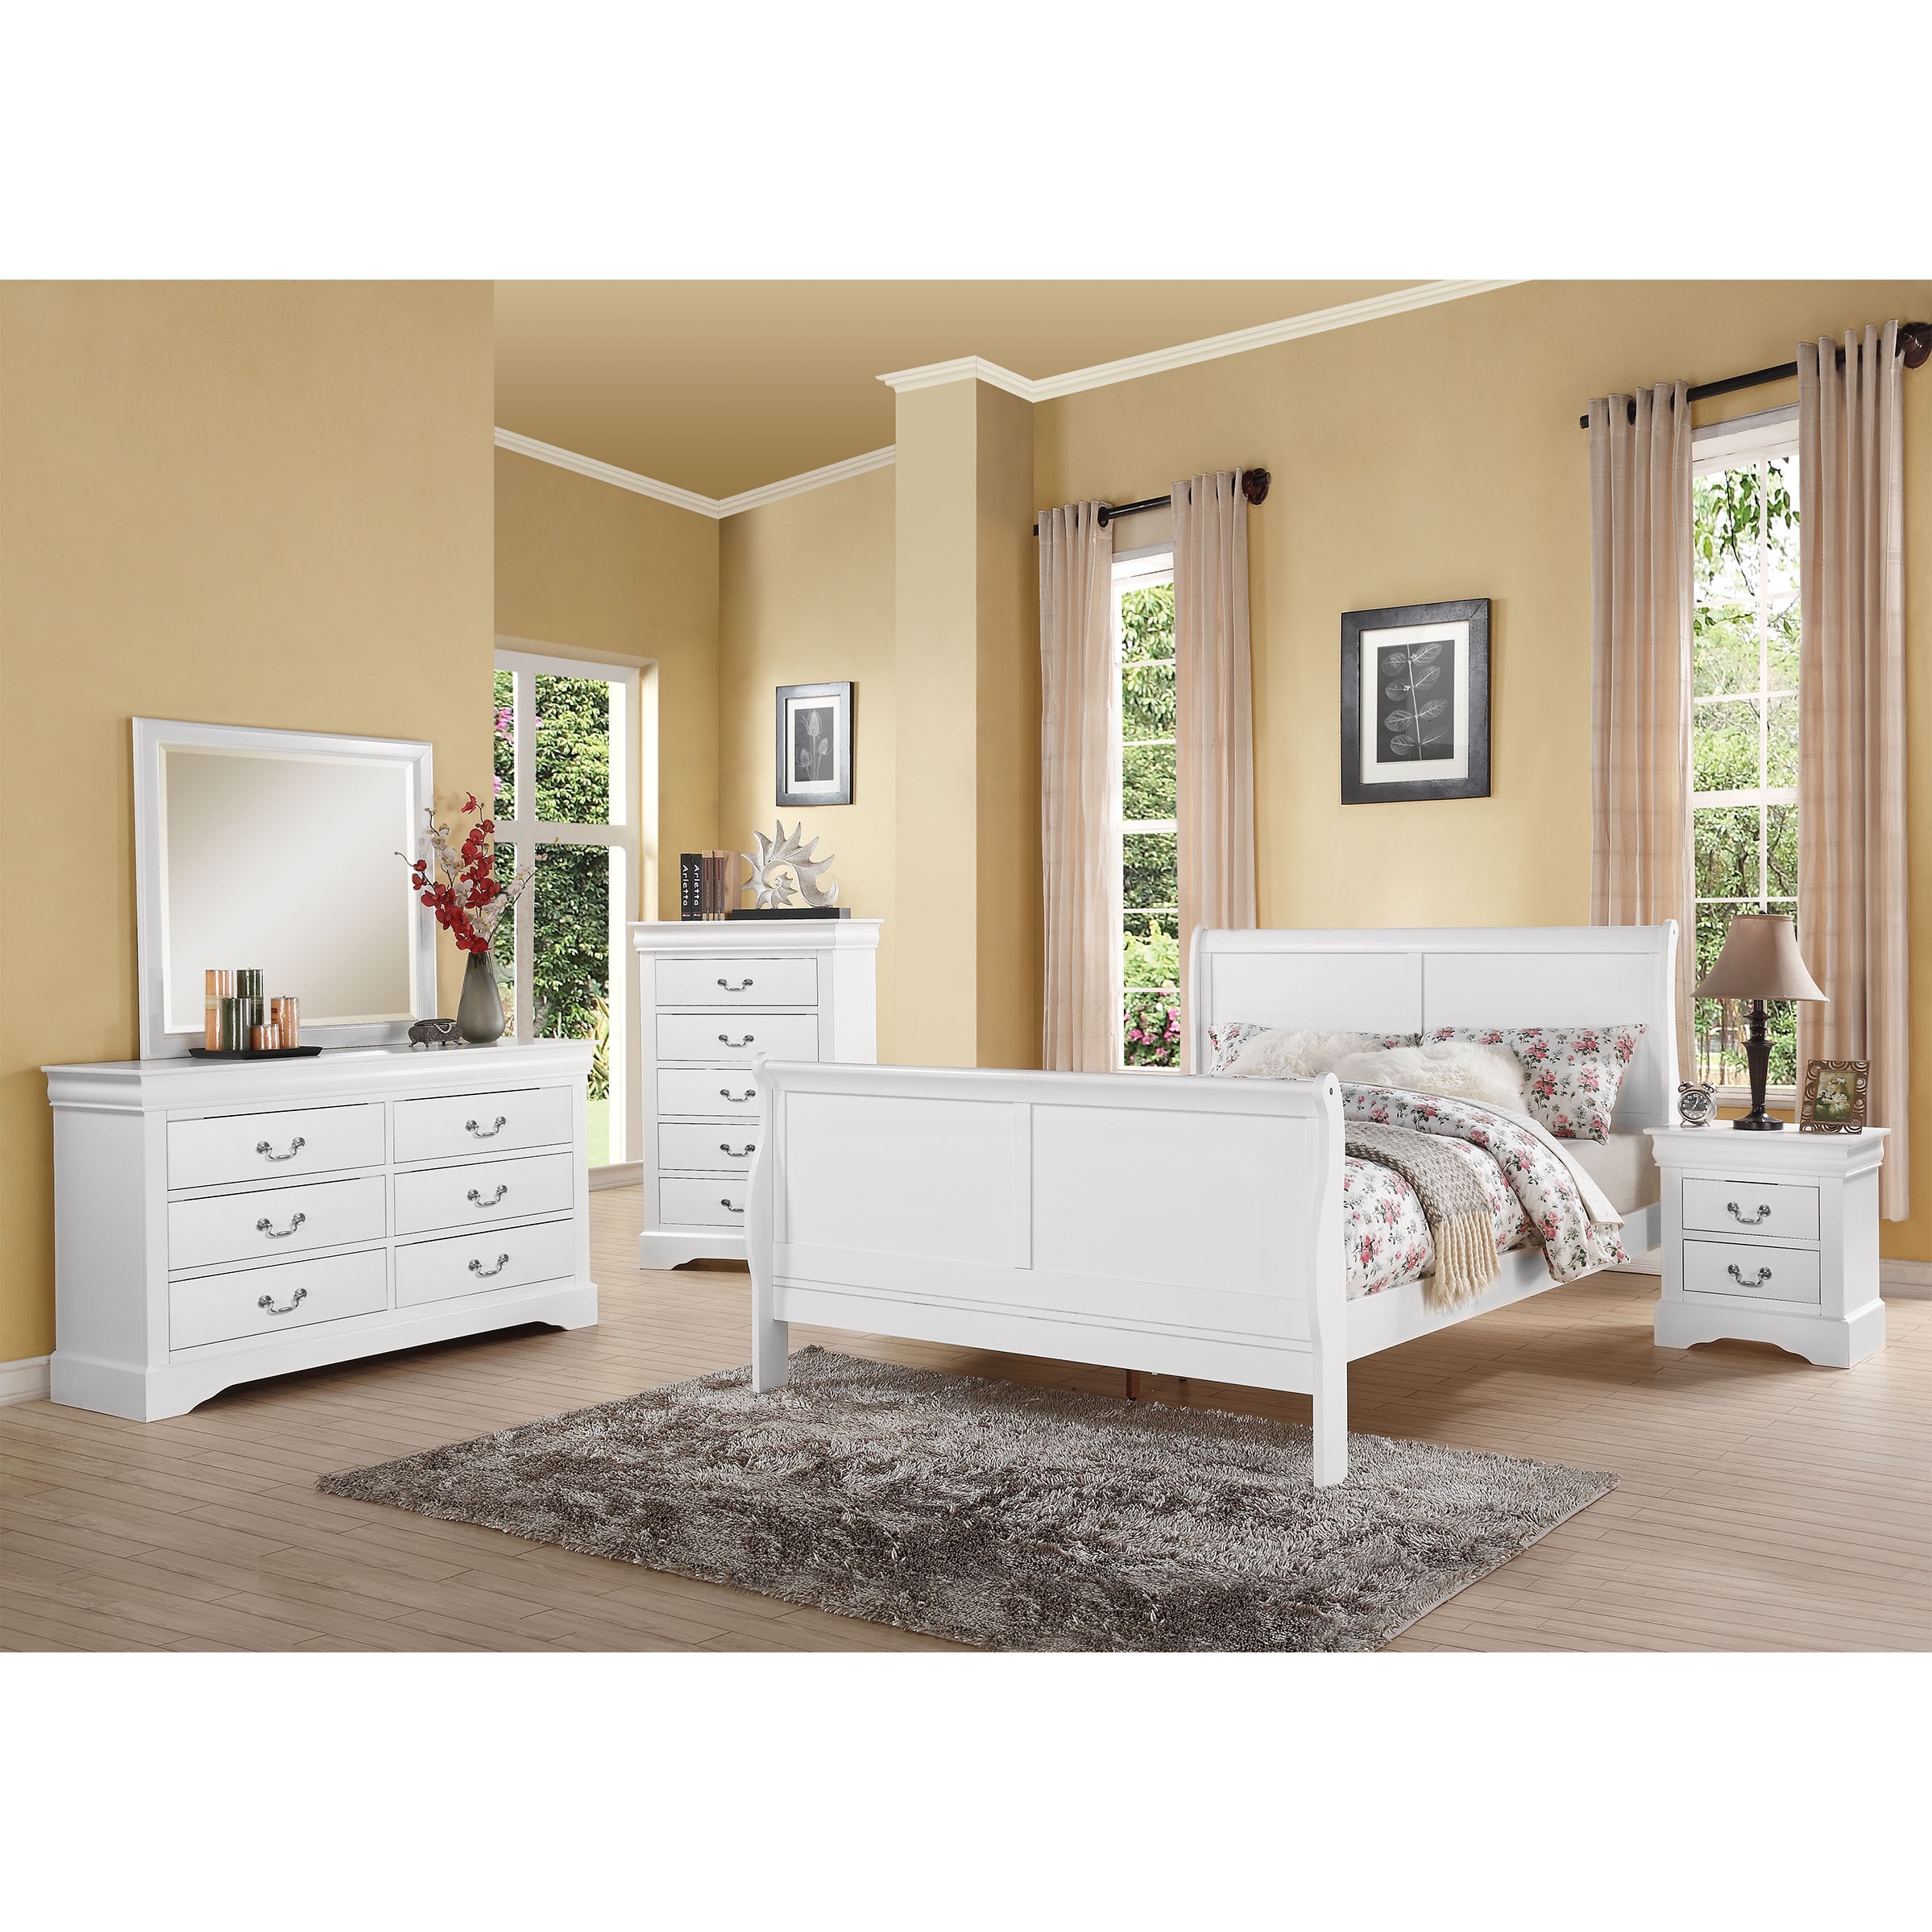 Acme Furniture Louis Philippe III Collection 24390Q5PC Bedroom Set with  Queen Size Bed, Dresser, Mirror, Chest and Nightstand in Black Finish